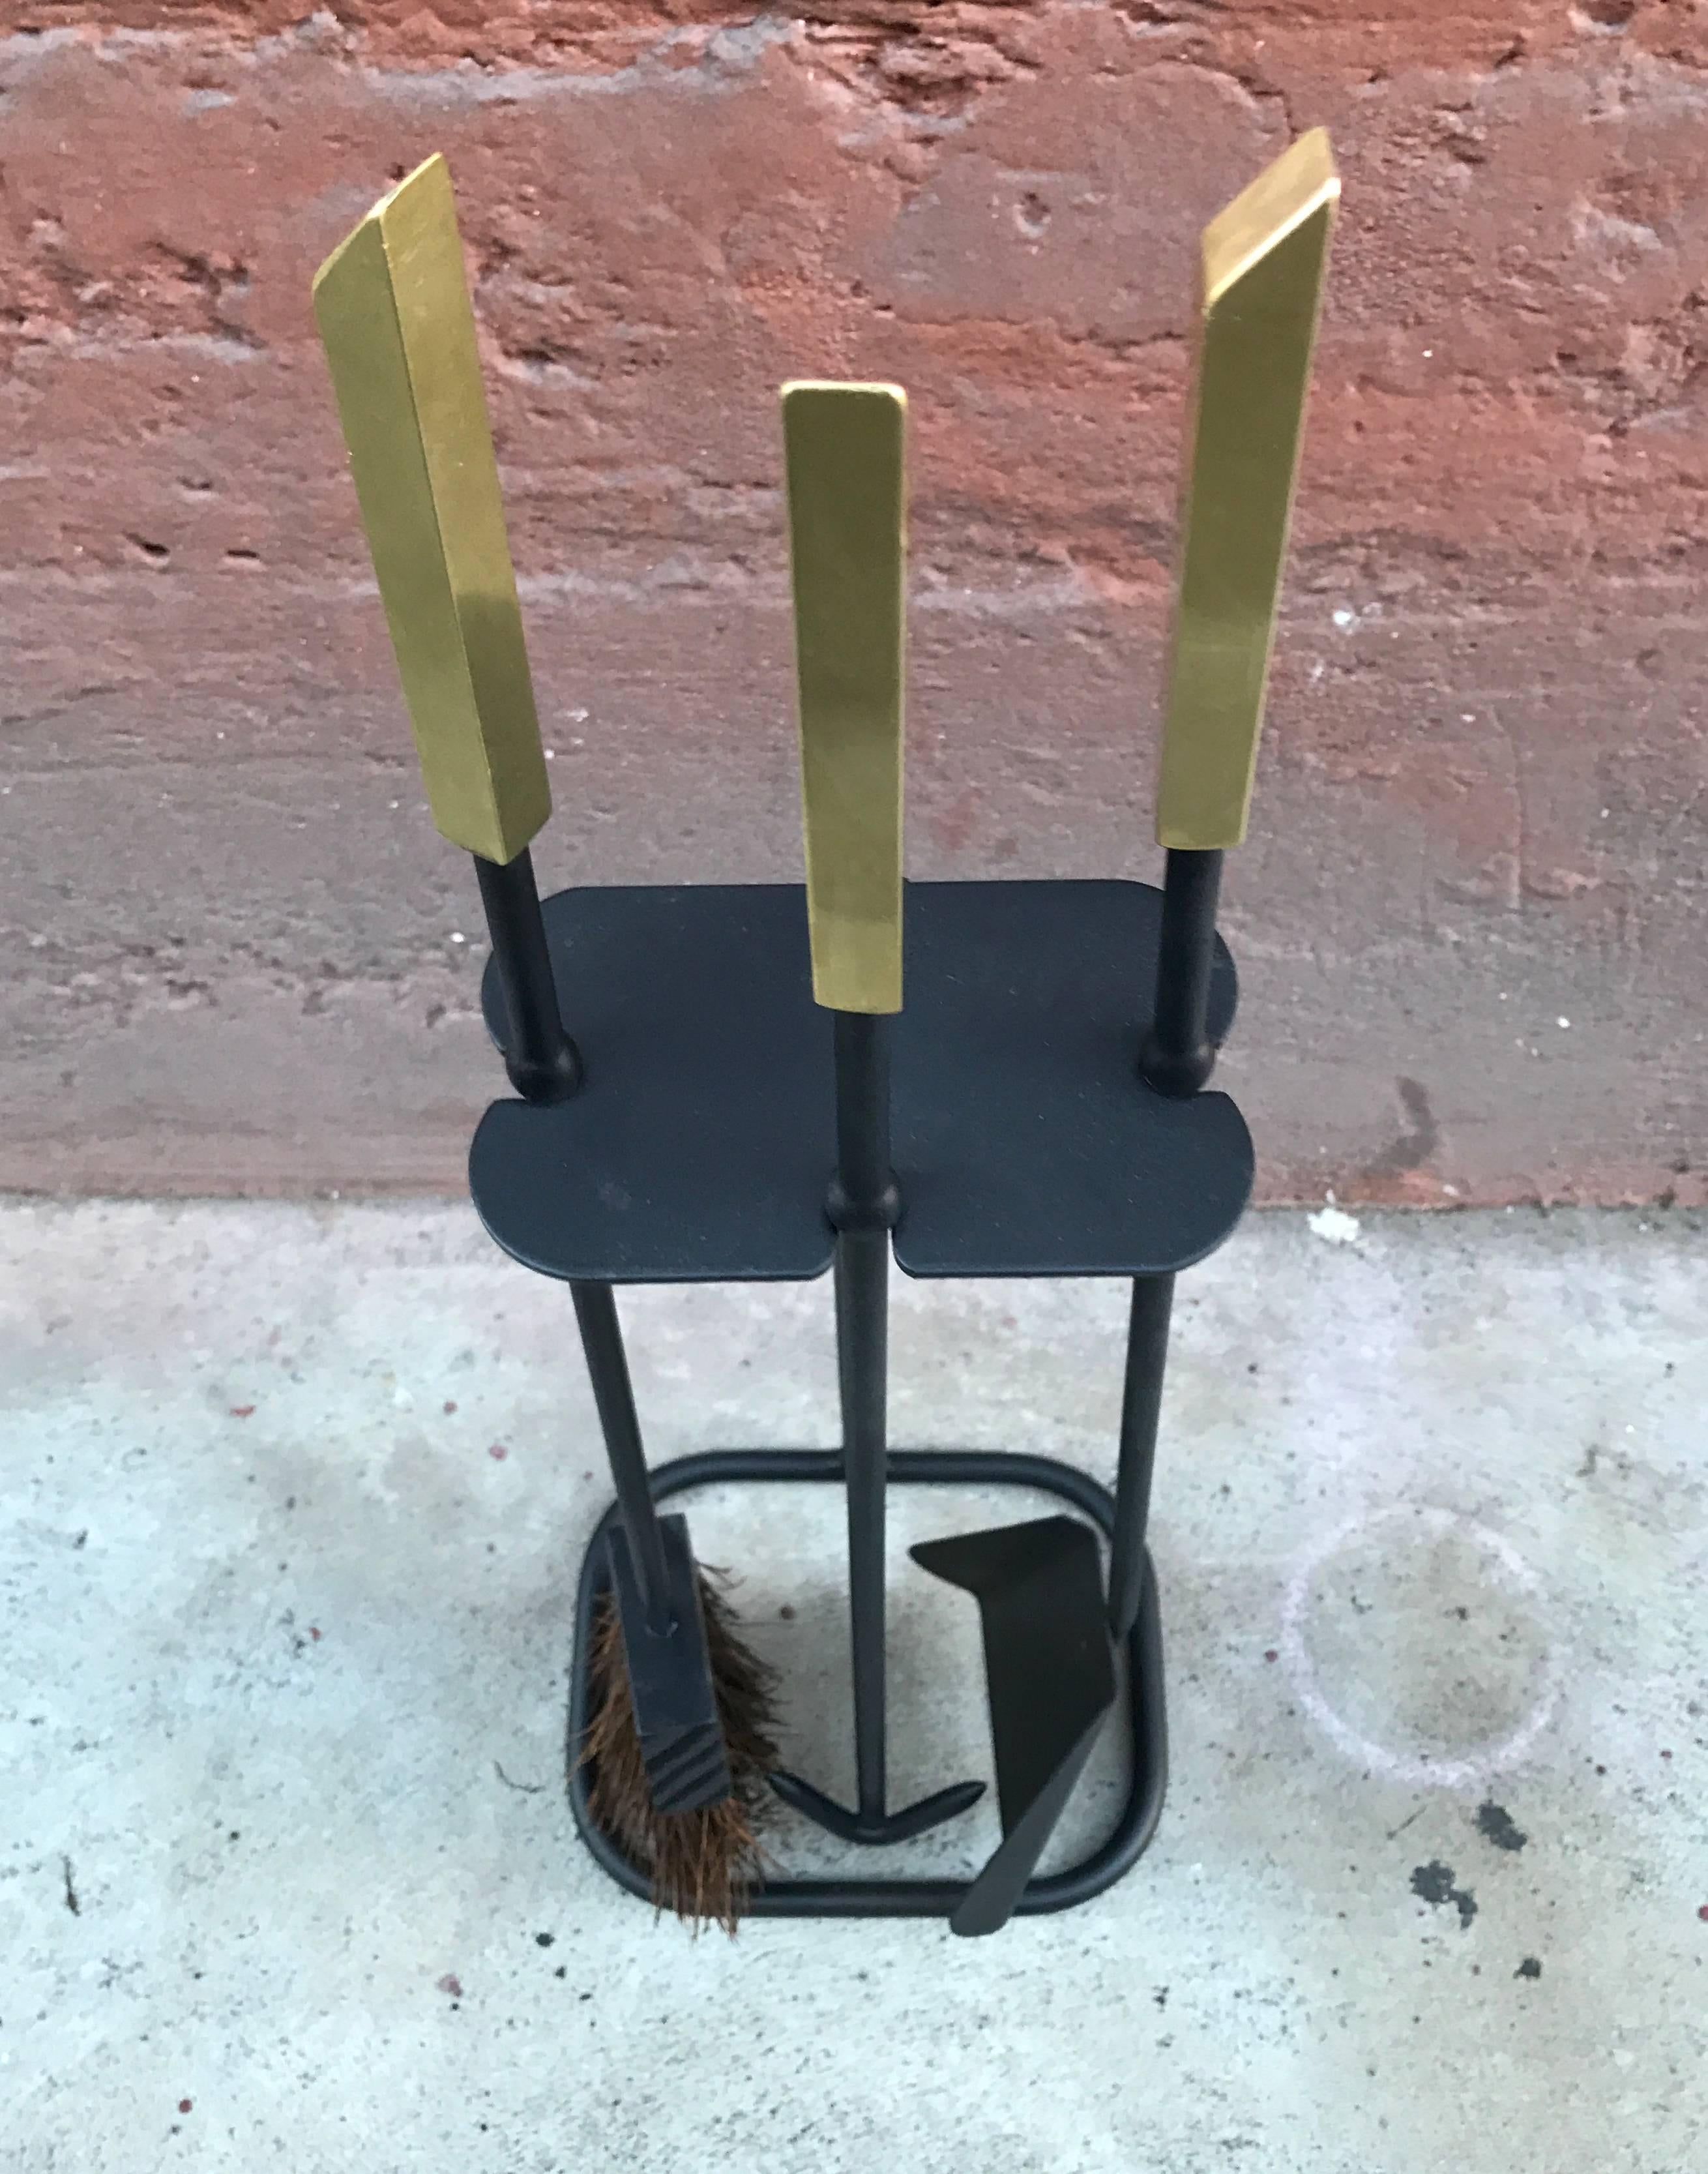 Freshly painted wrought iron fire tools with polished solid brass handles, a simple and striking modernist design.